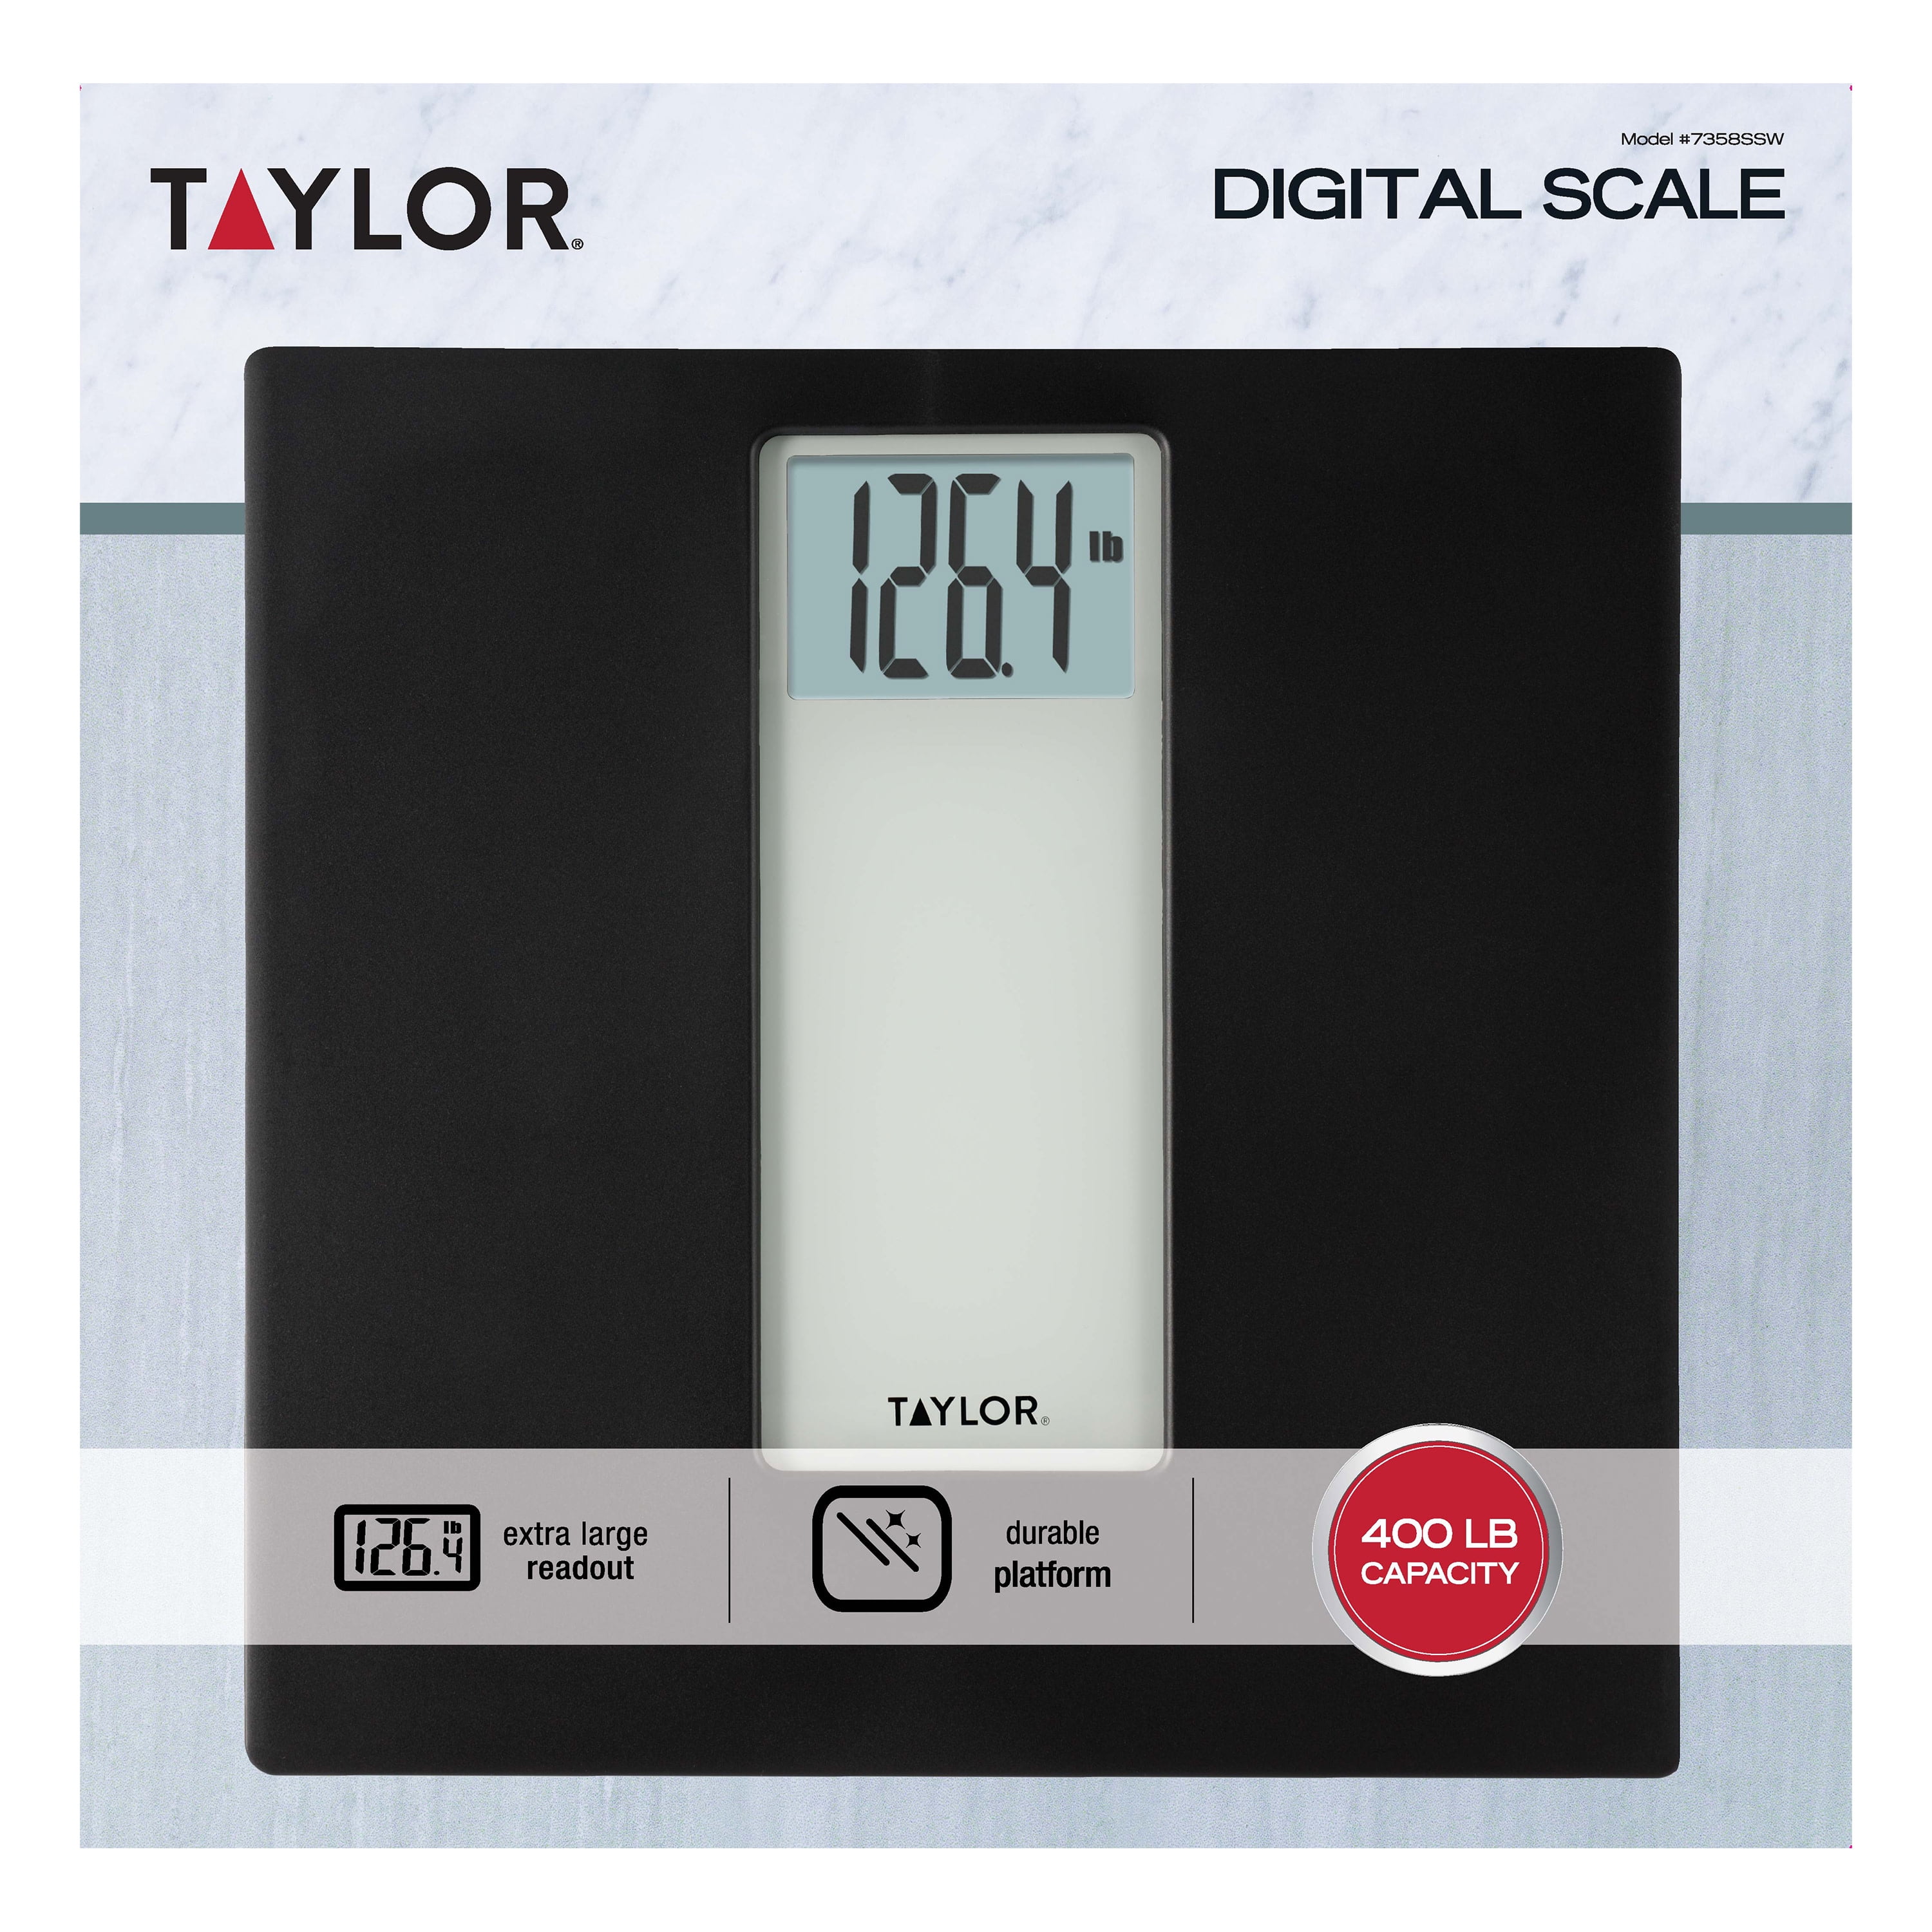 Taylor Weight Watchers Scale for Sale in Las Cruces, NM - OfferUp